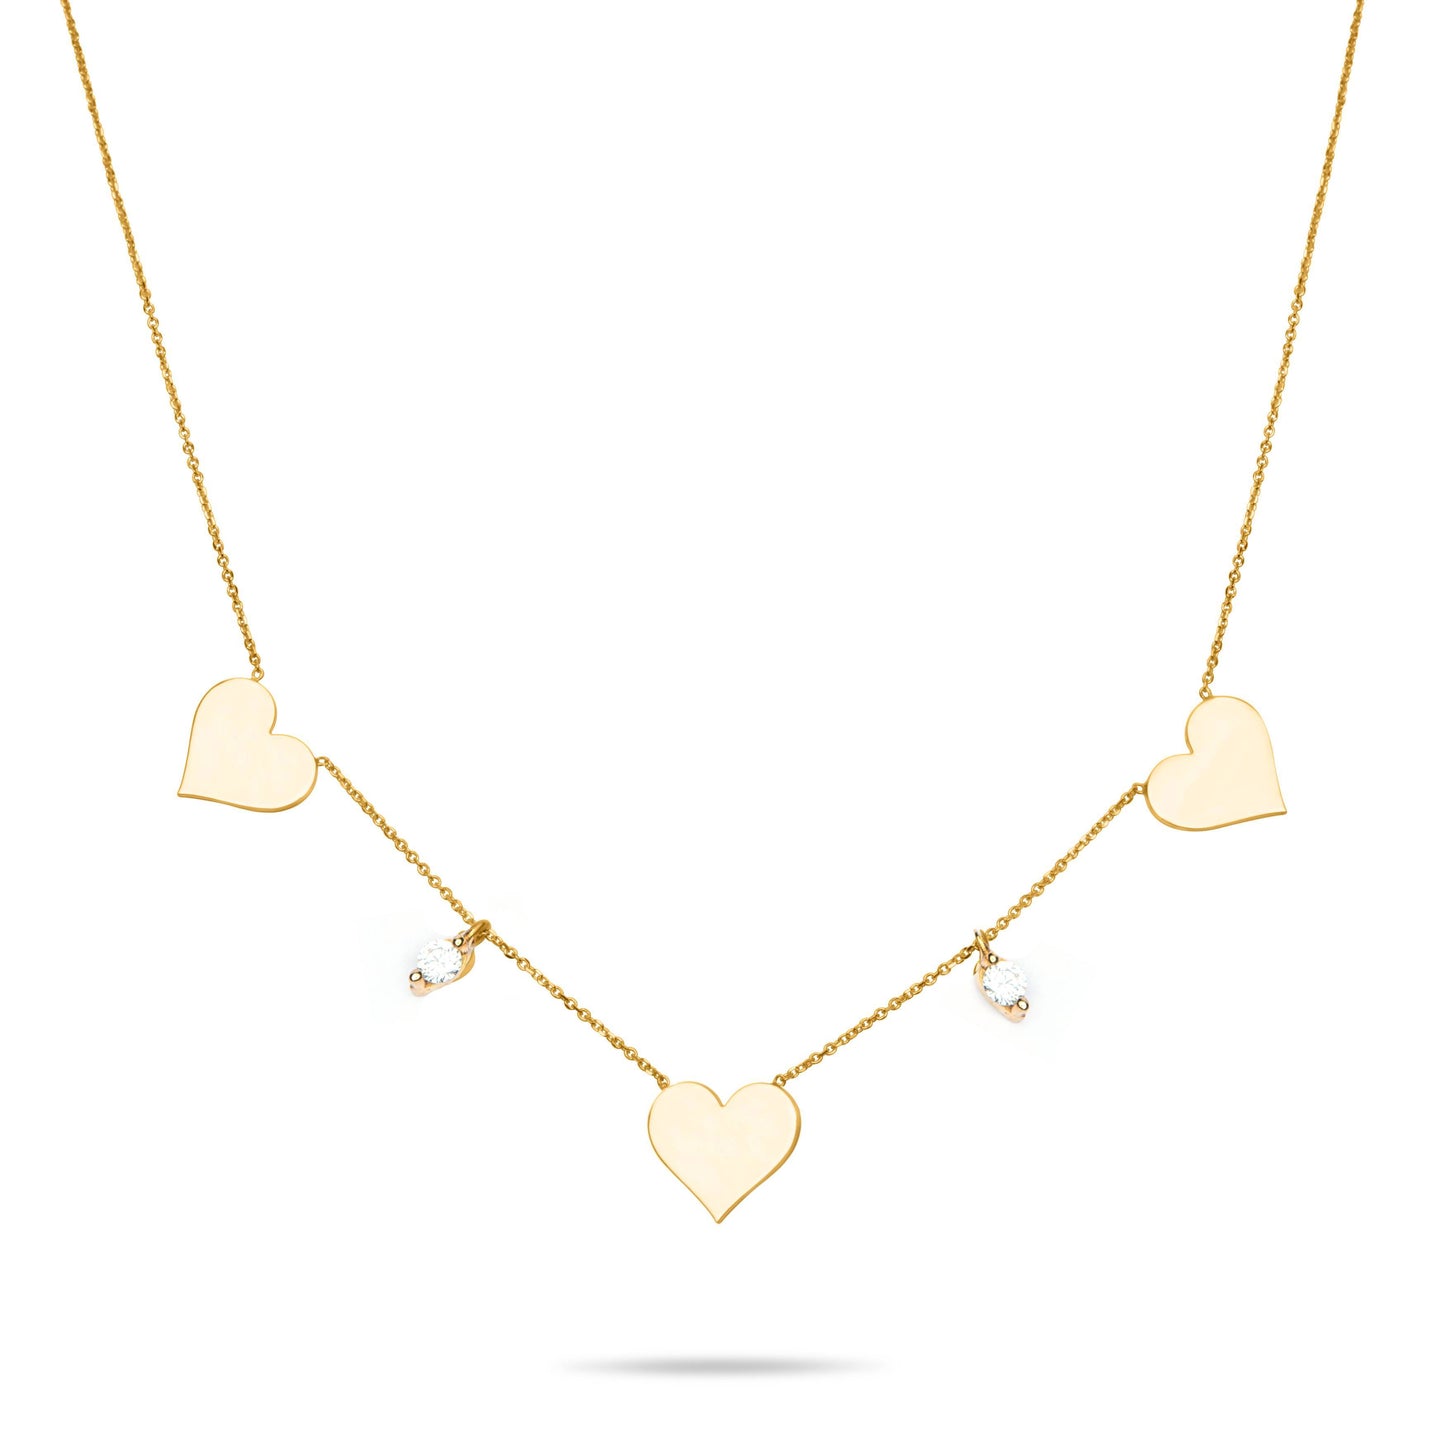 Three Hearts necklace with White stones - Gold Plated